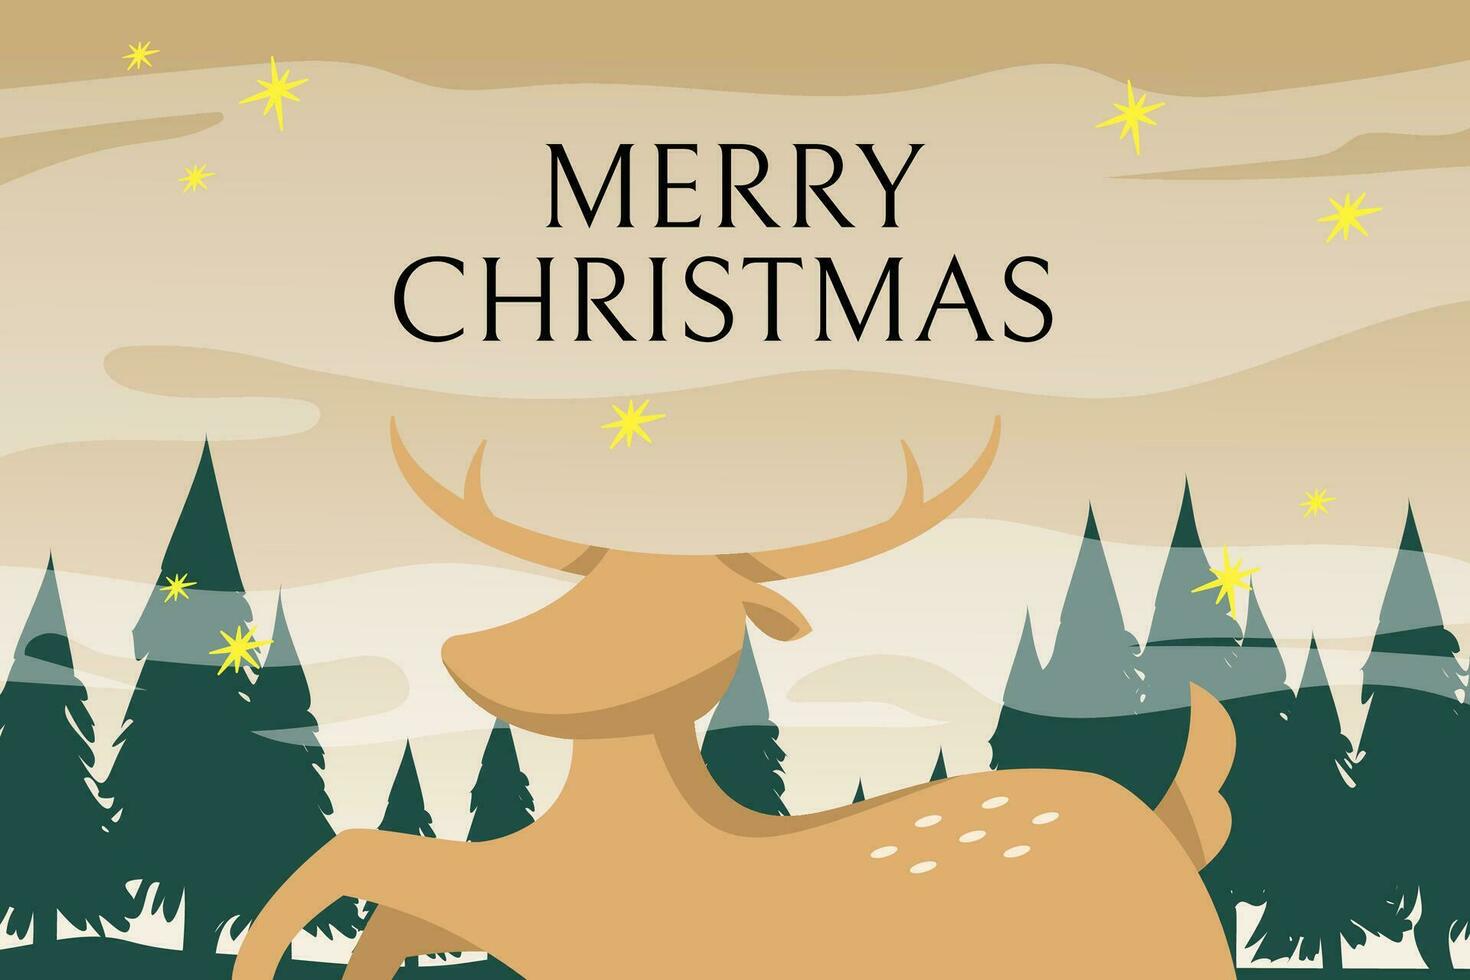 Christmas greetings banner with deer on pine forest and winter landscape background vector